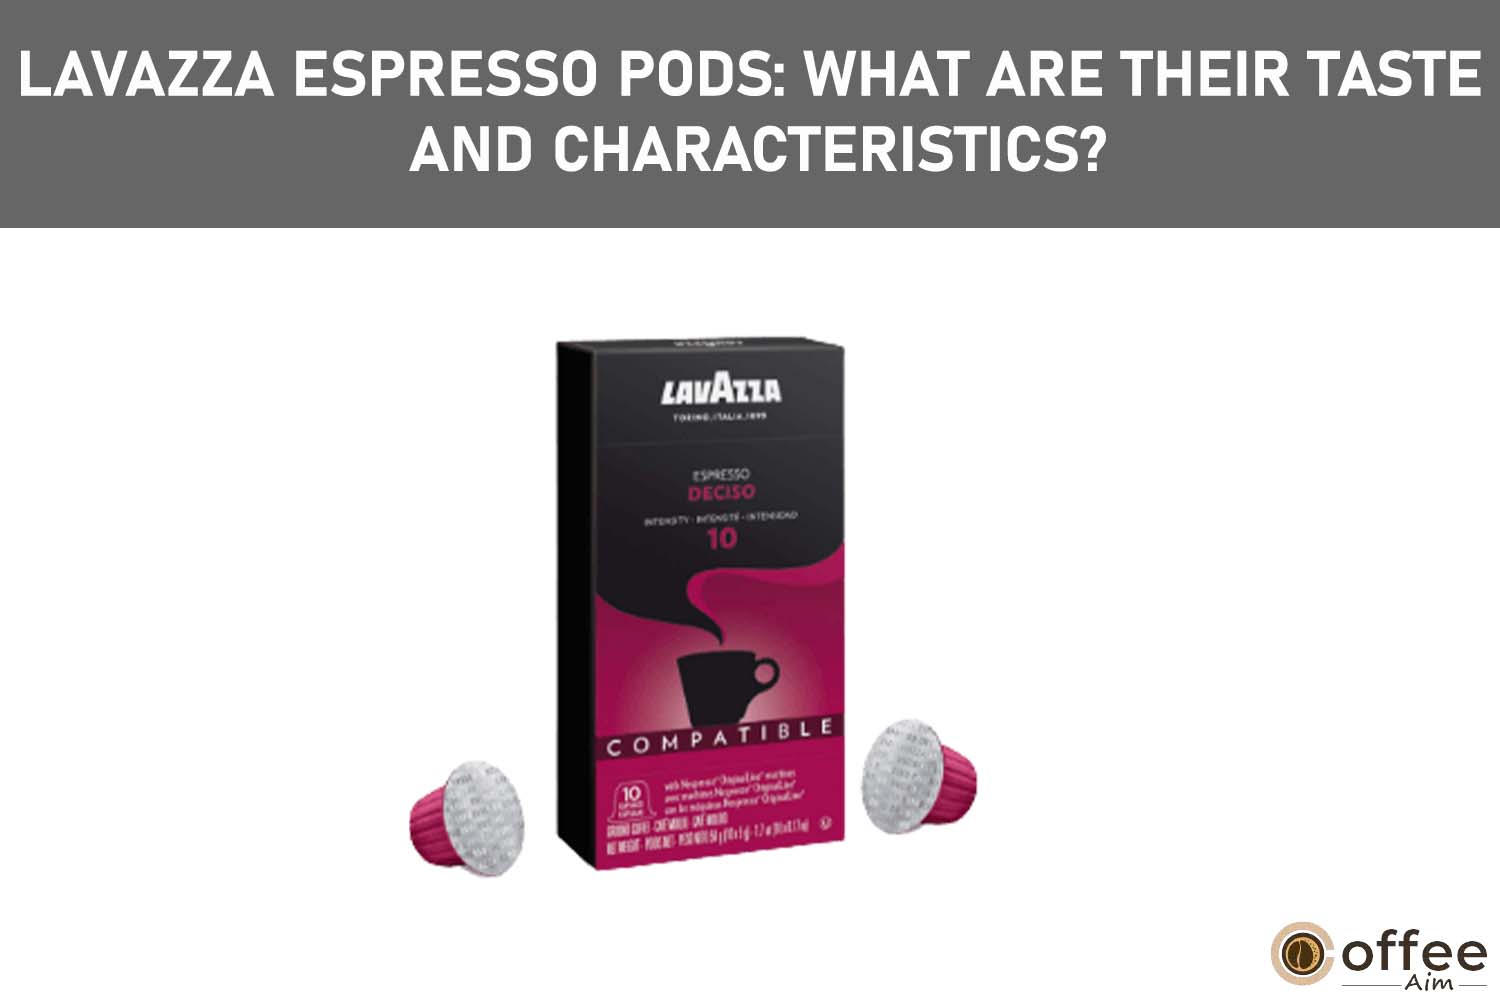 Featured image for the article "Lavazza Espresso Pods: What are Their Taste and Characteristics?"